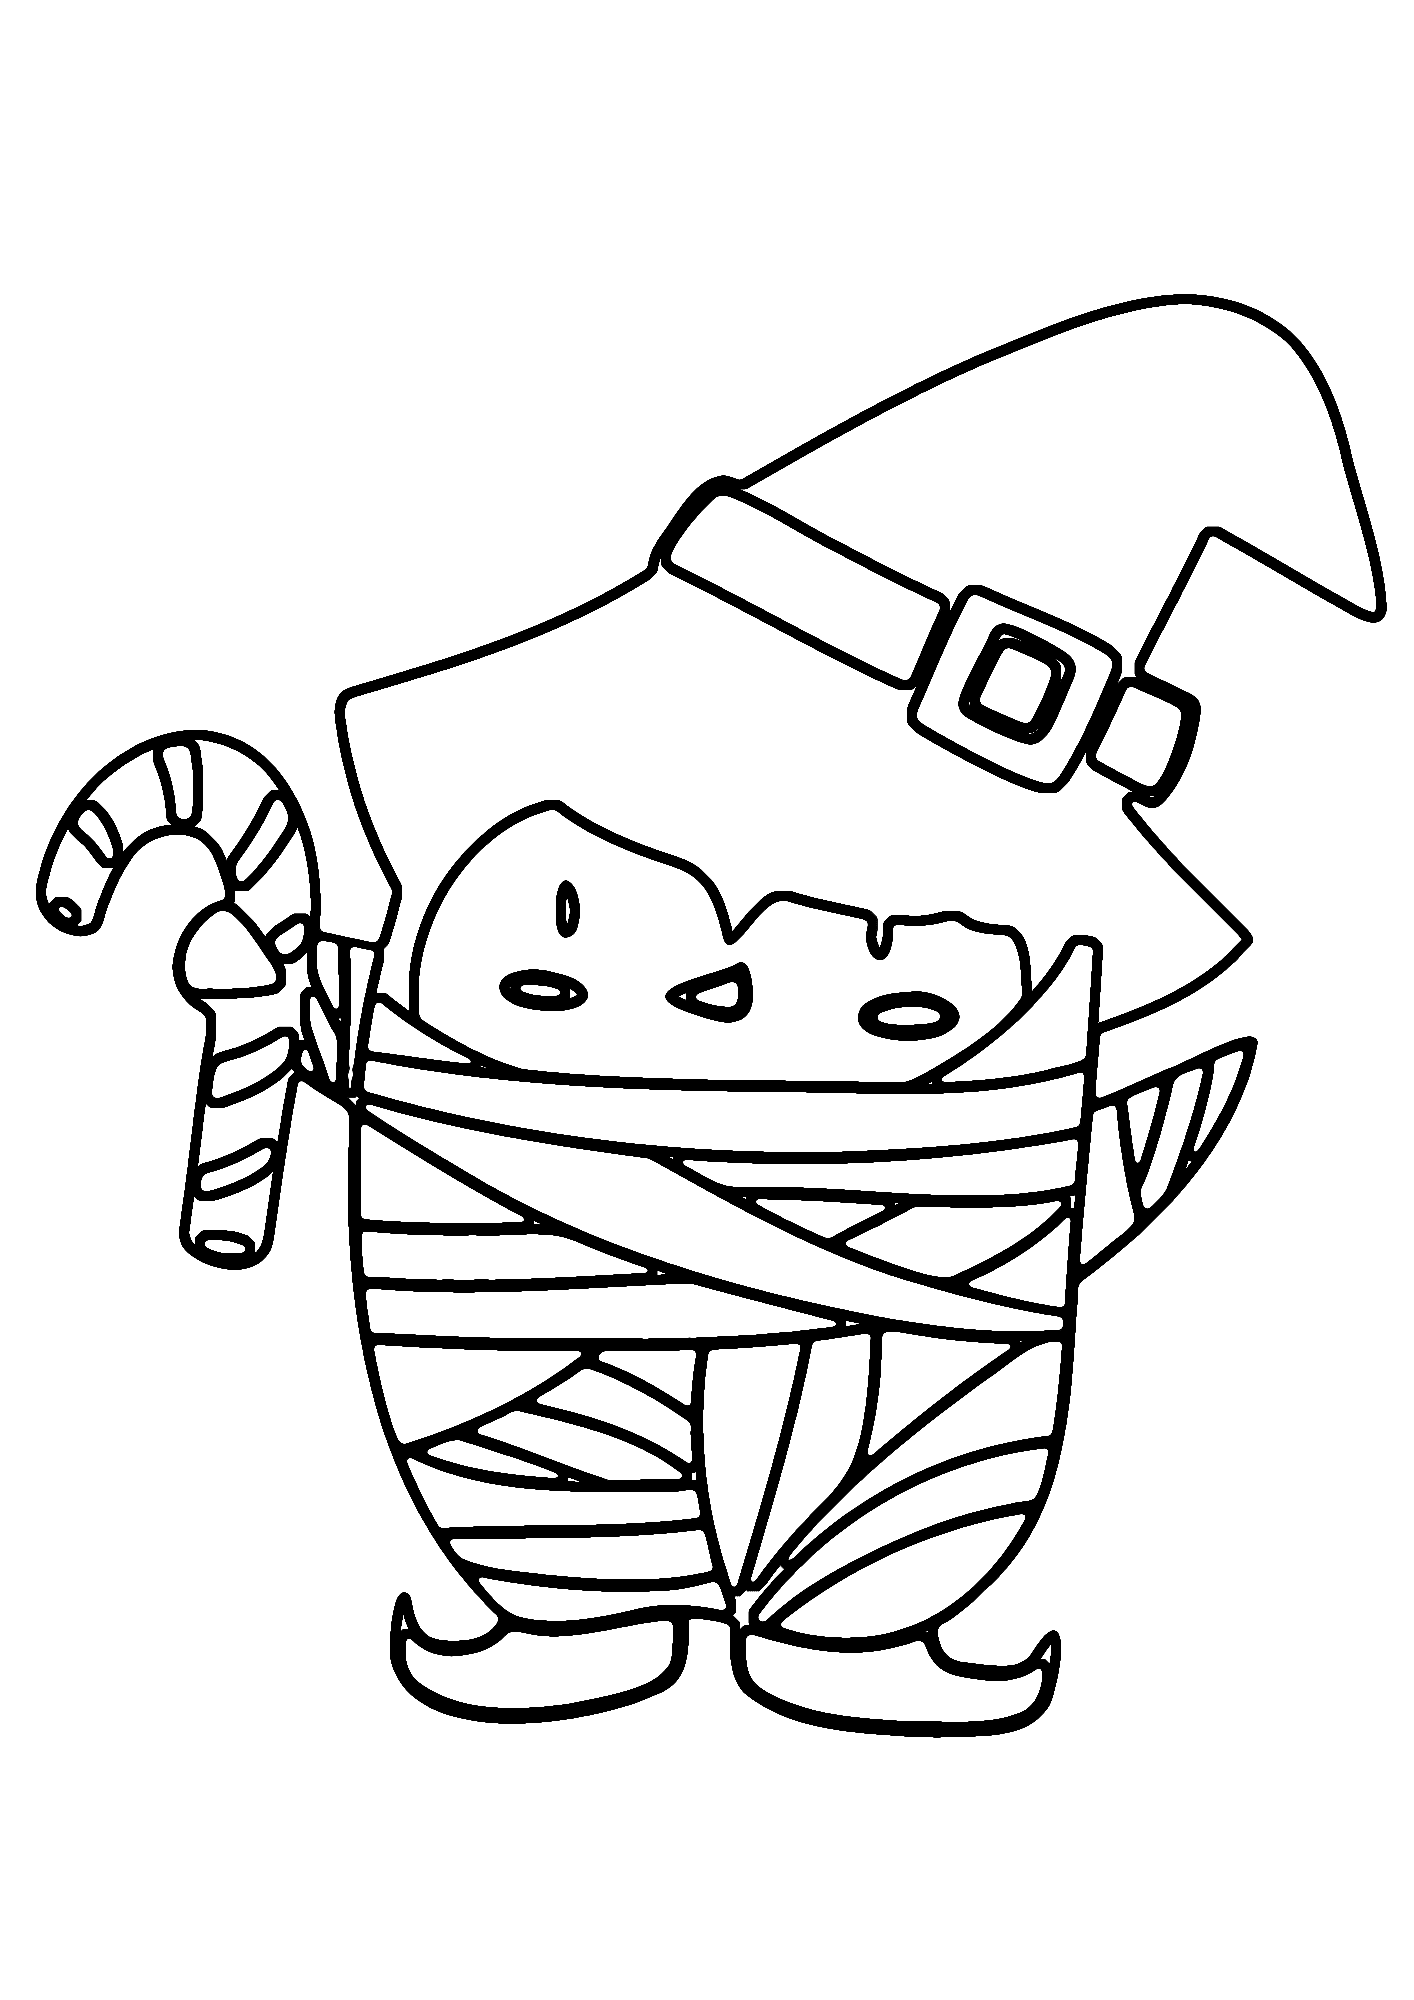 Halloween Penguin Coloring Page